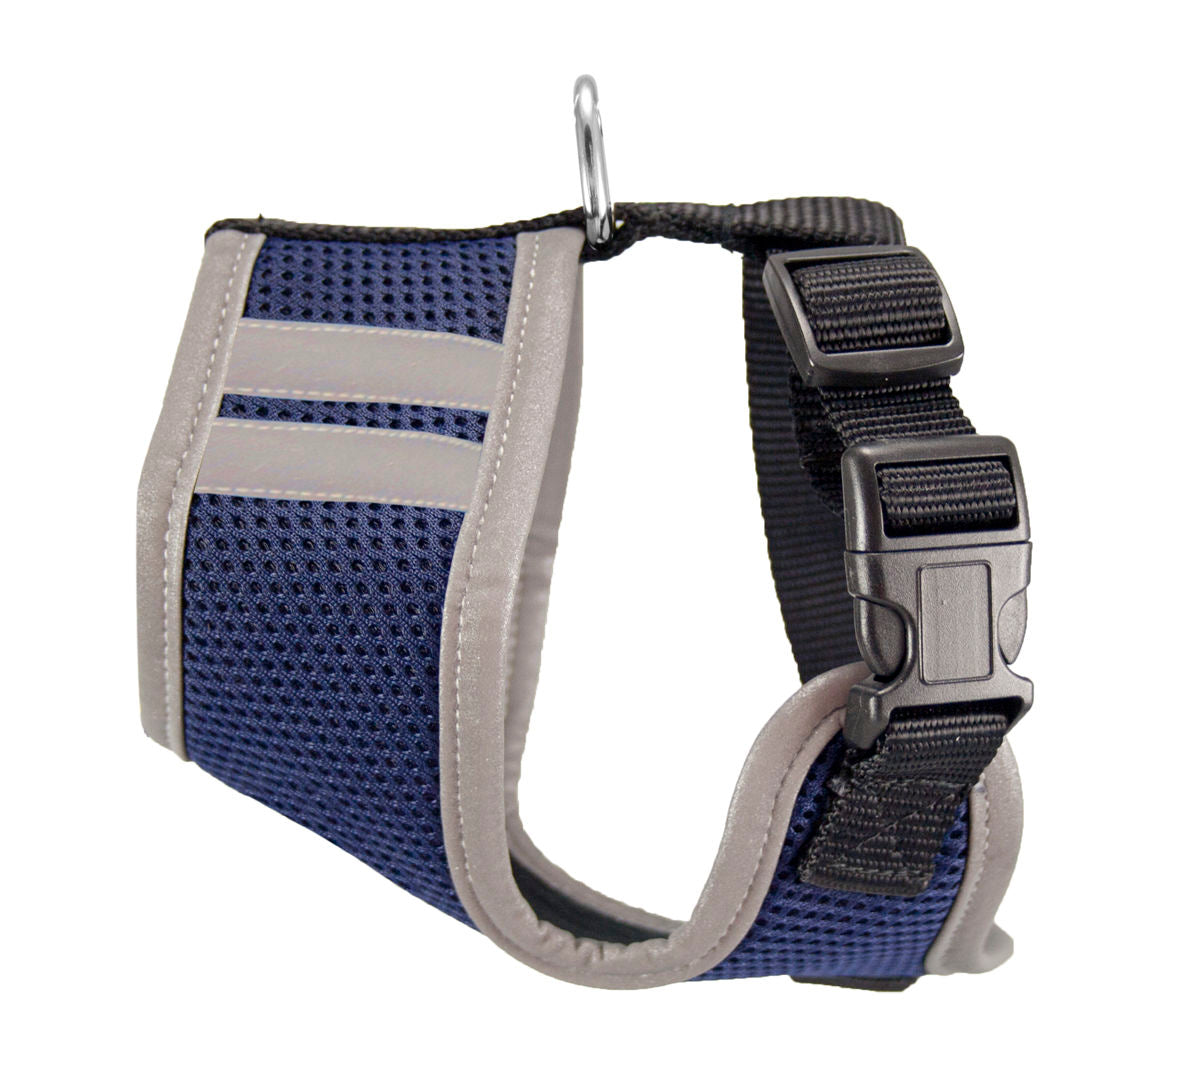 NFL Harness - Indianapolis Colts